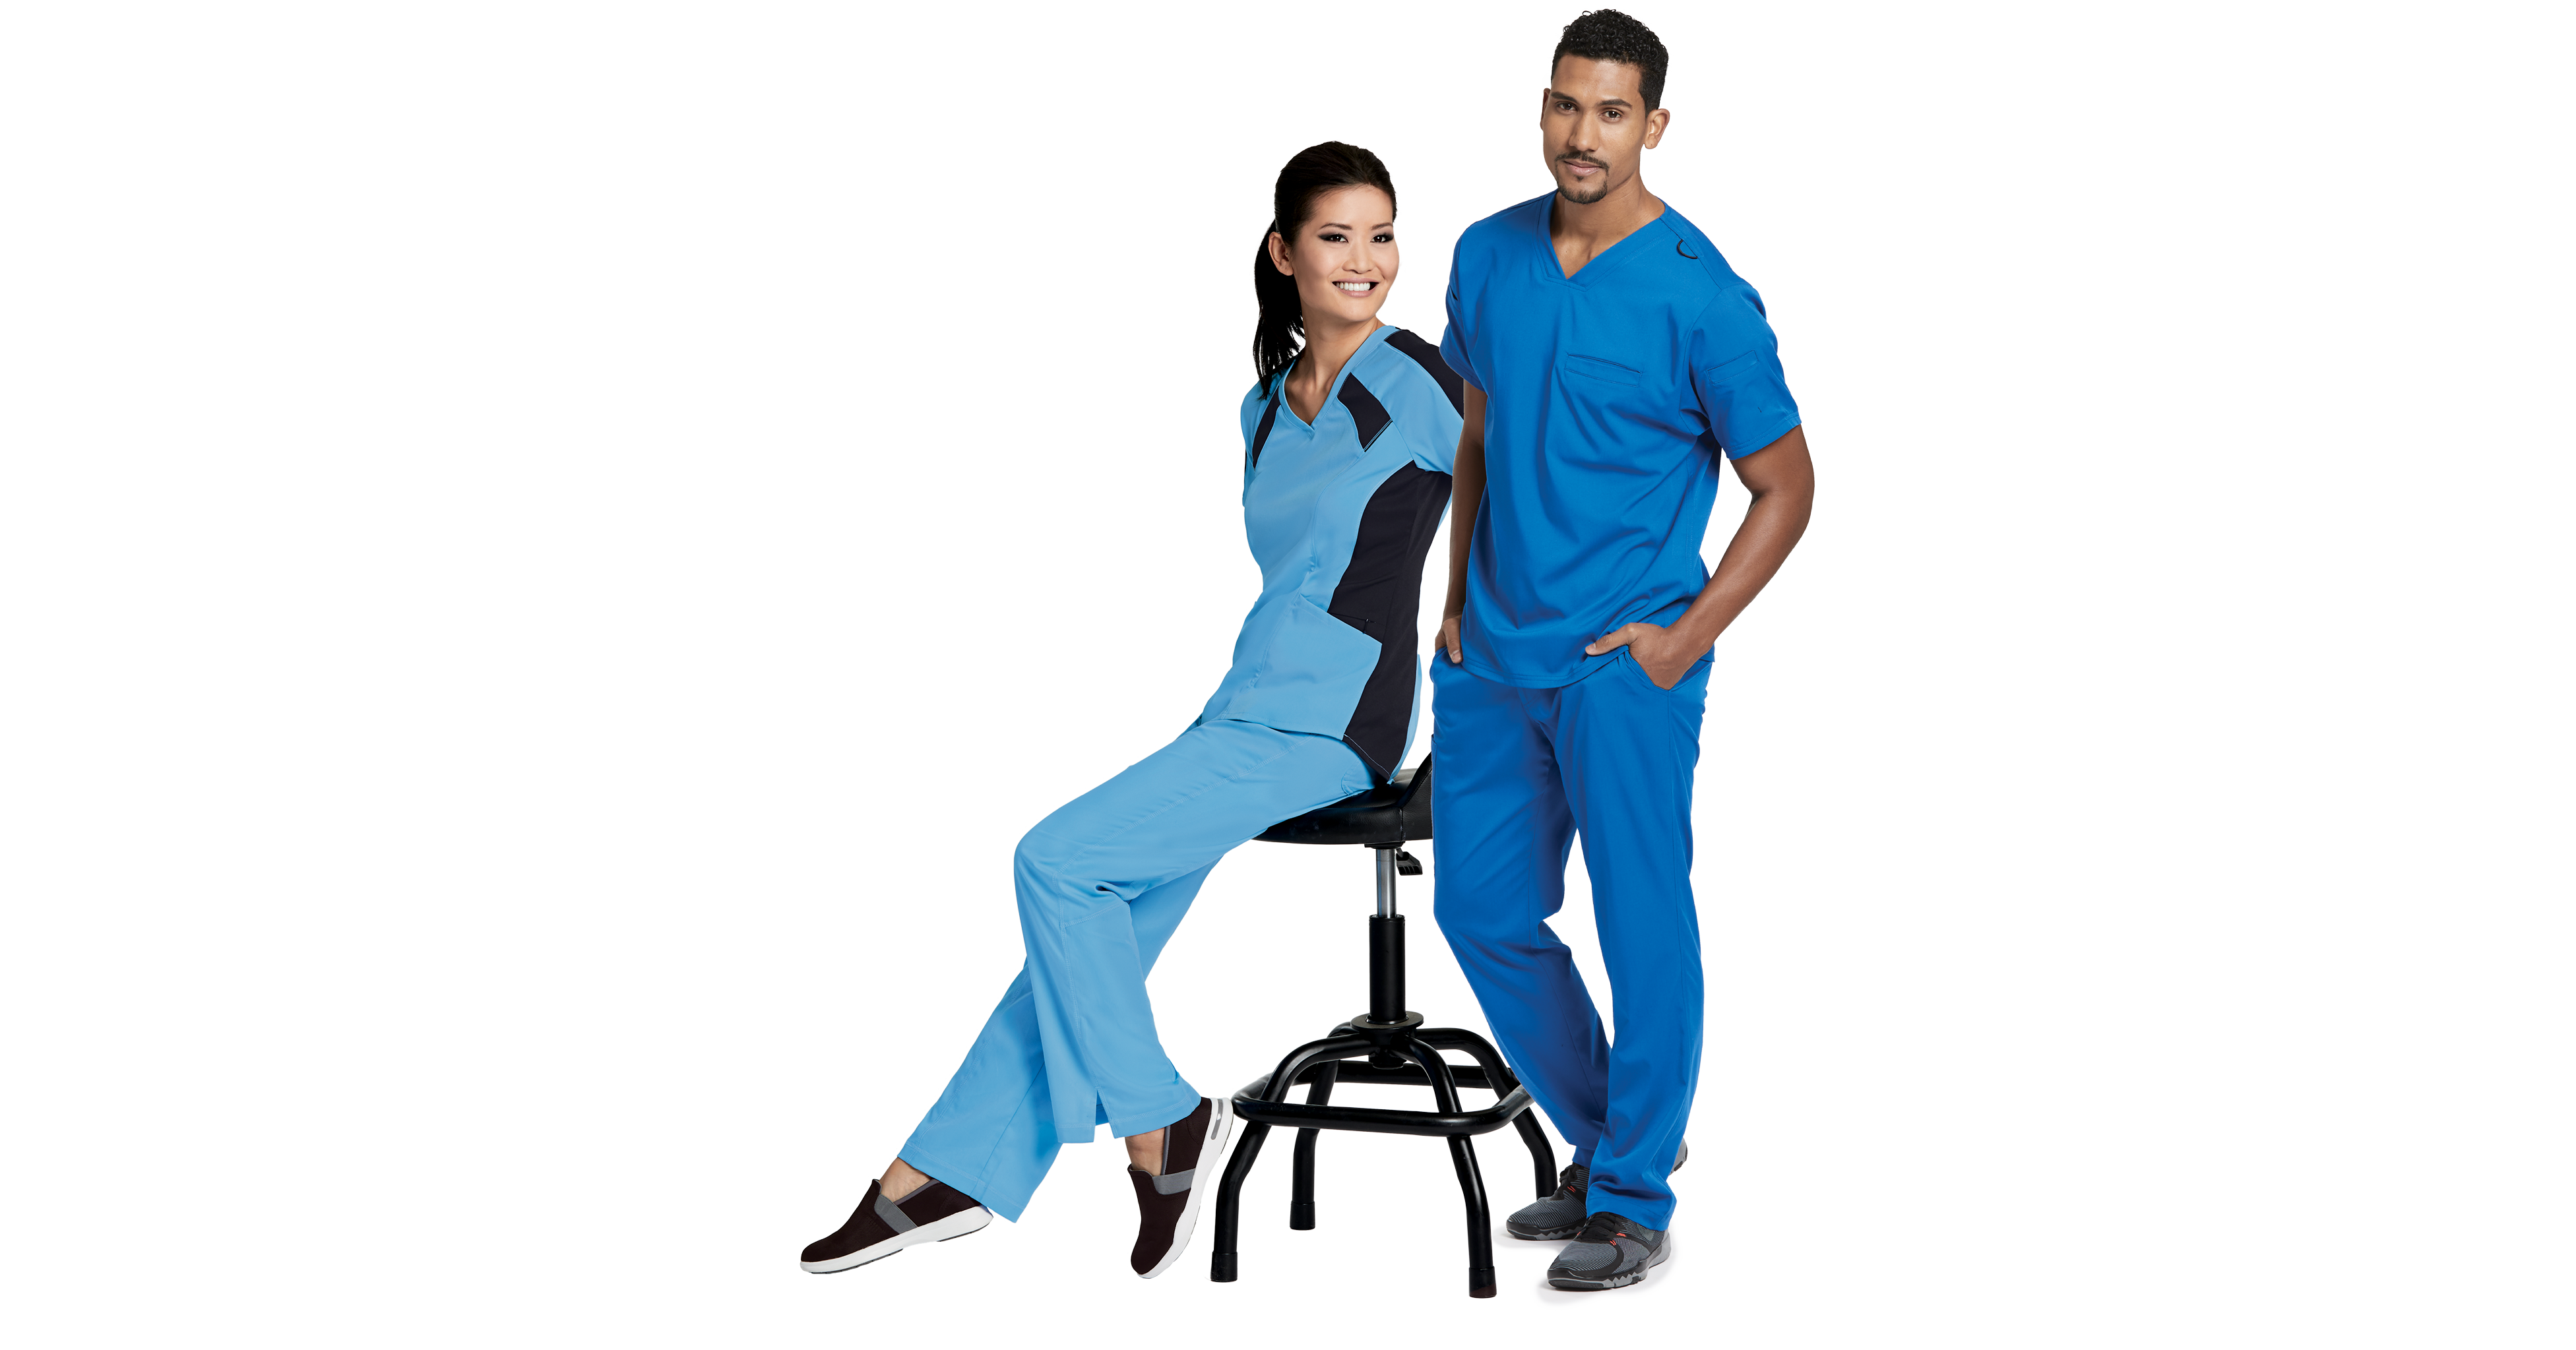 Two healthcare professionals in blue scrubs smiling against white background